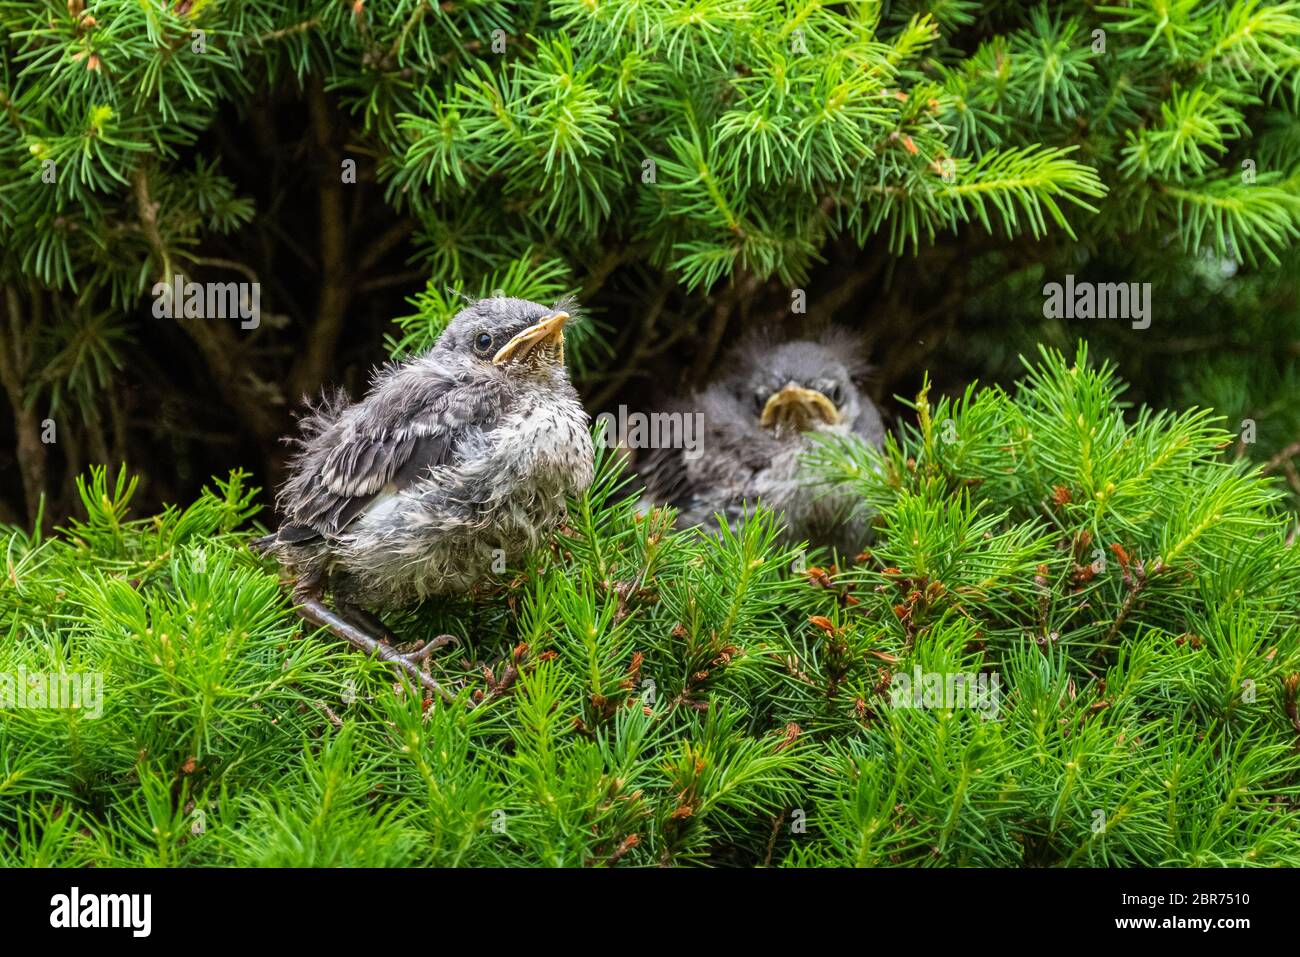 A pair of young Northern Mockingbird fledglings sit perched in a pine tree, green background. Stock Photo